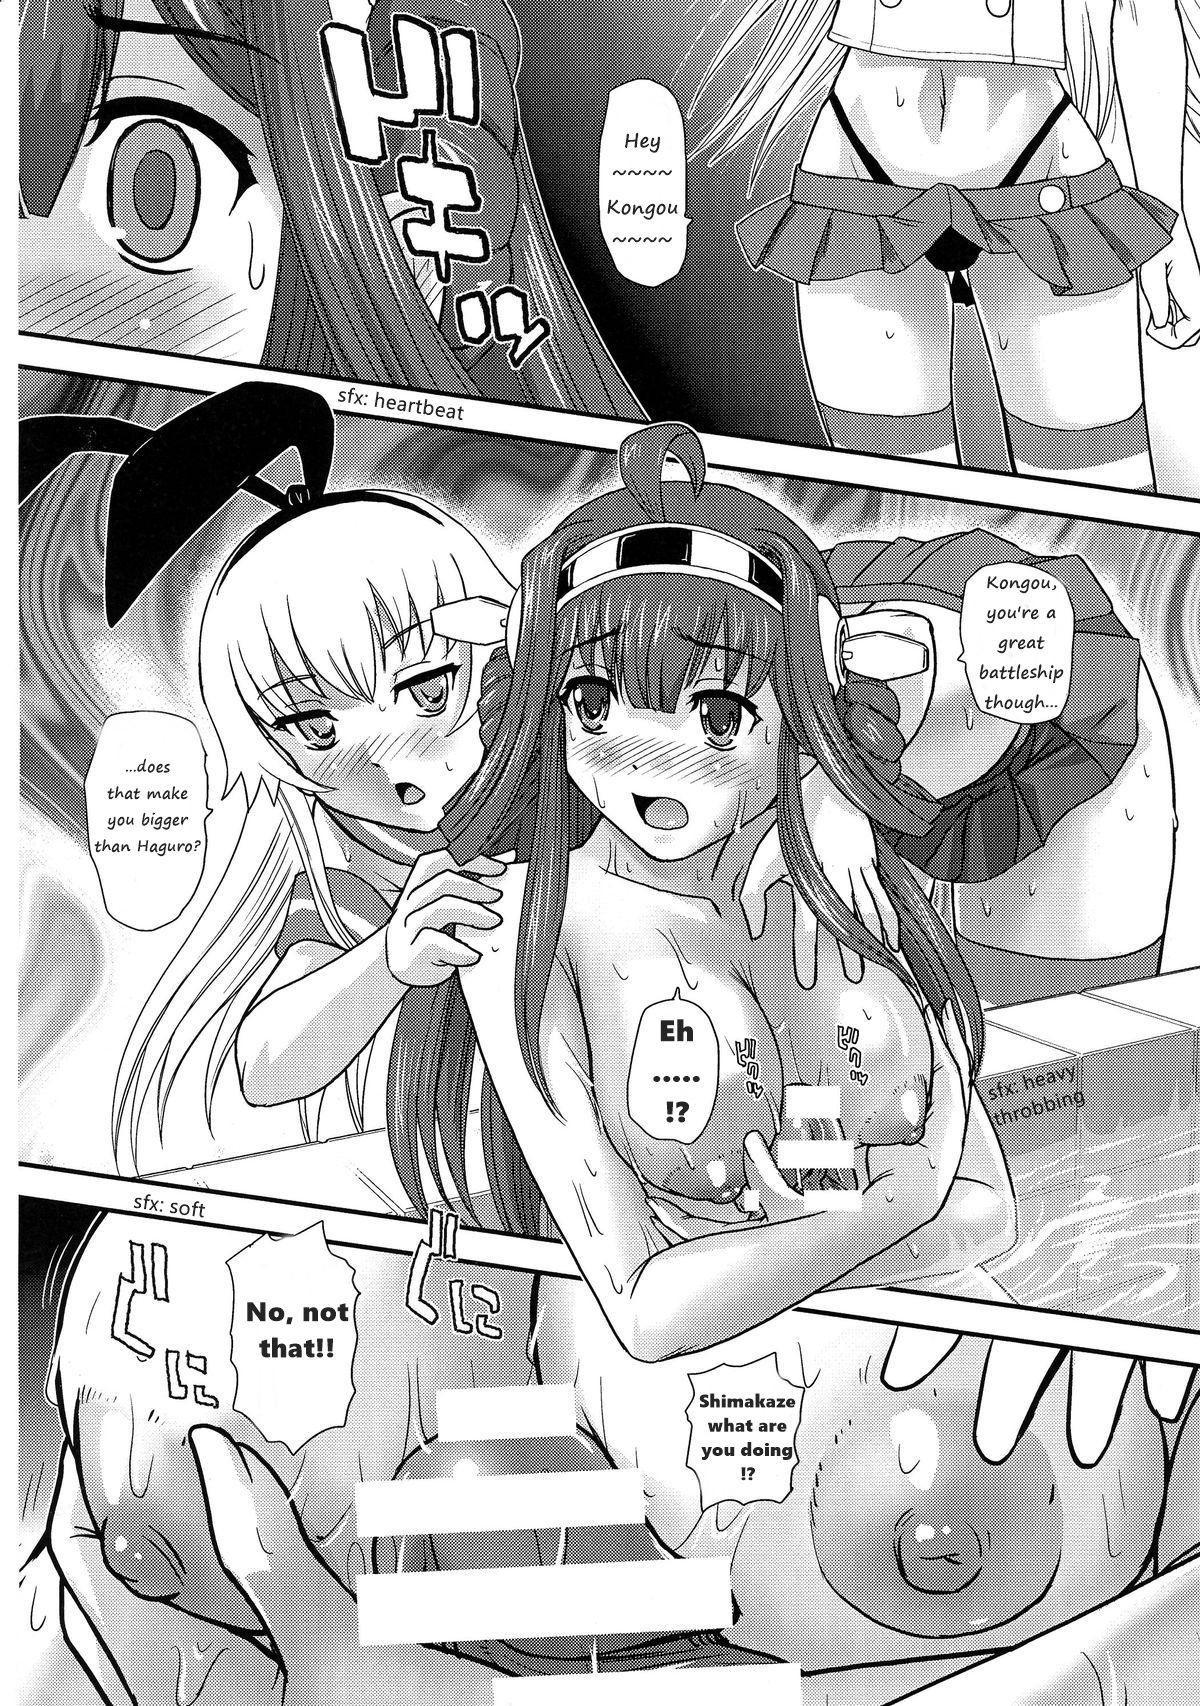 Rough Chinshufu!! - Kantai collection Arpeggio of blue steel Suck - Page 10